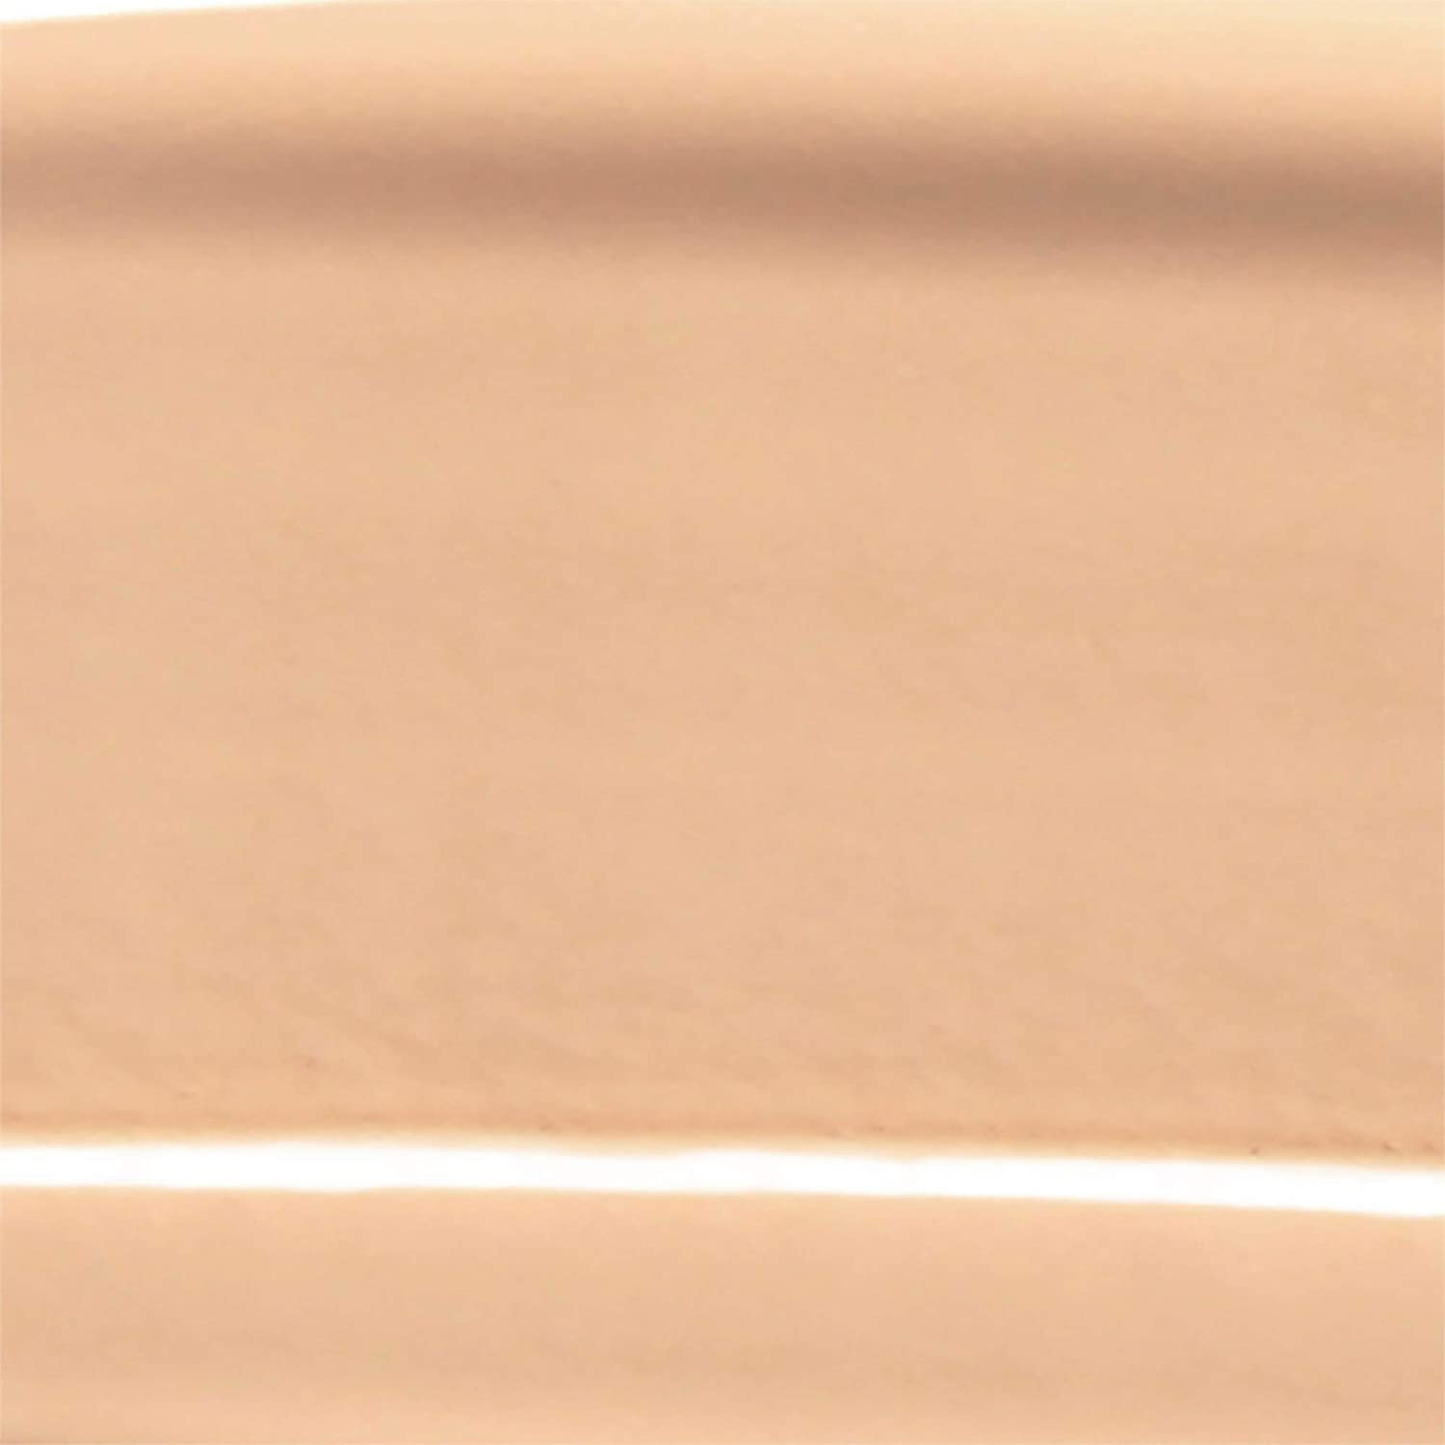 Wet N Wild Photo Focus Foundation 362C 3- Soft Ivory 1 Ounce (Pack of 1)